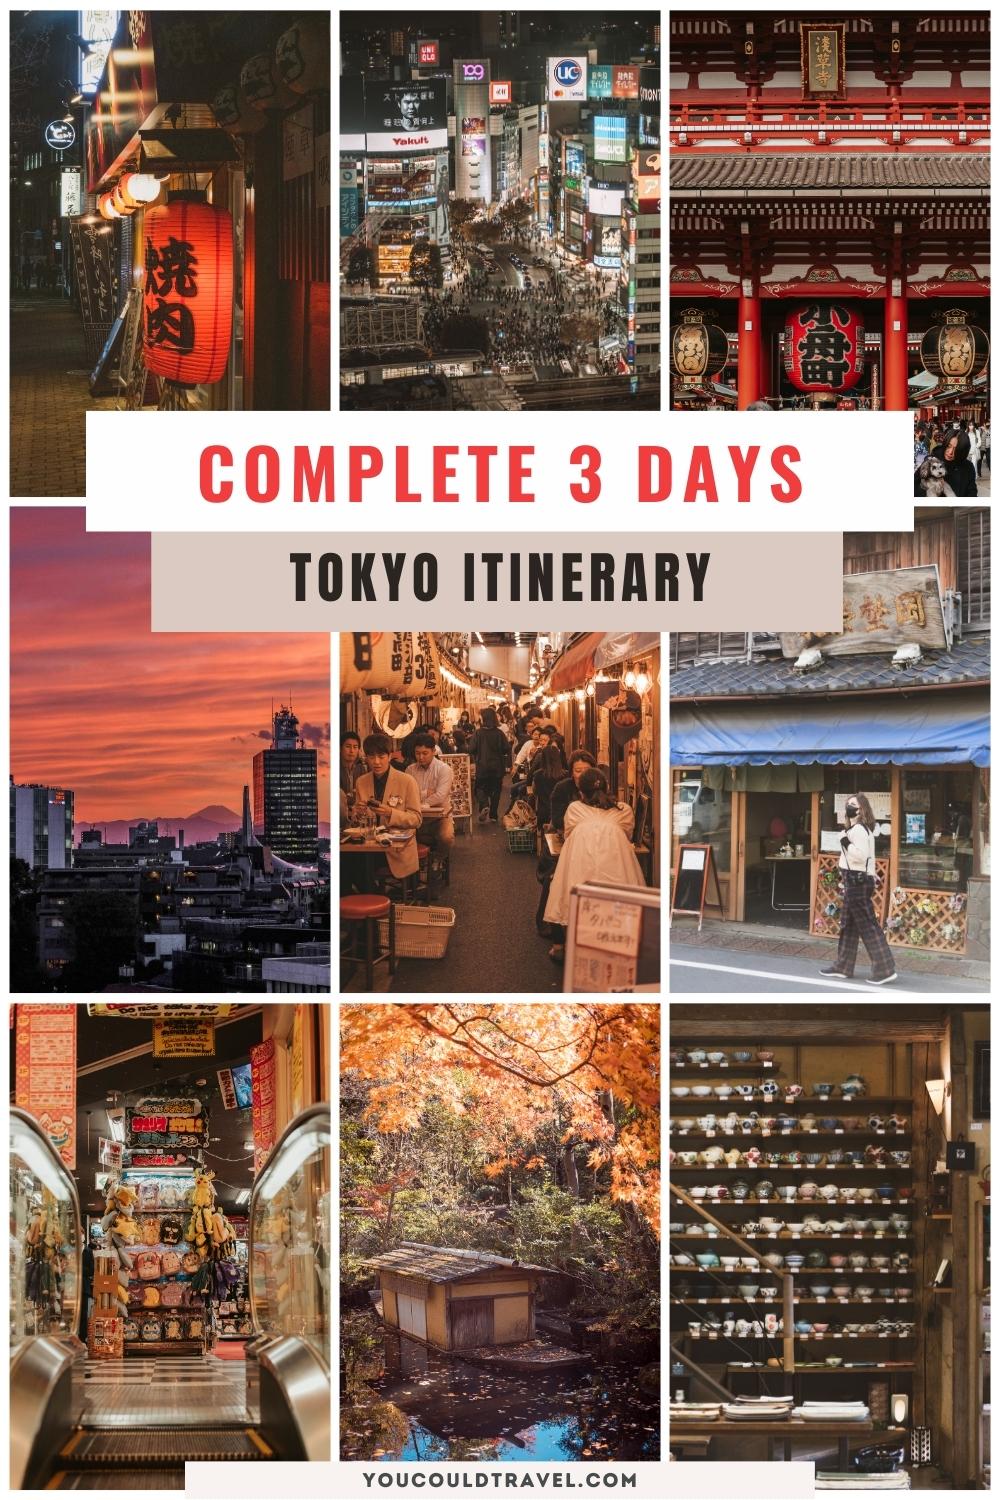 3 days in Tokyo itinerary